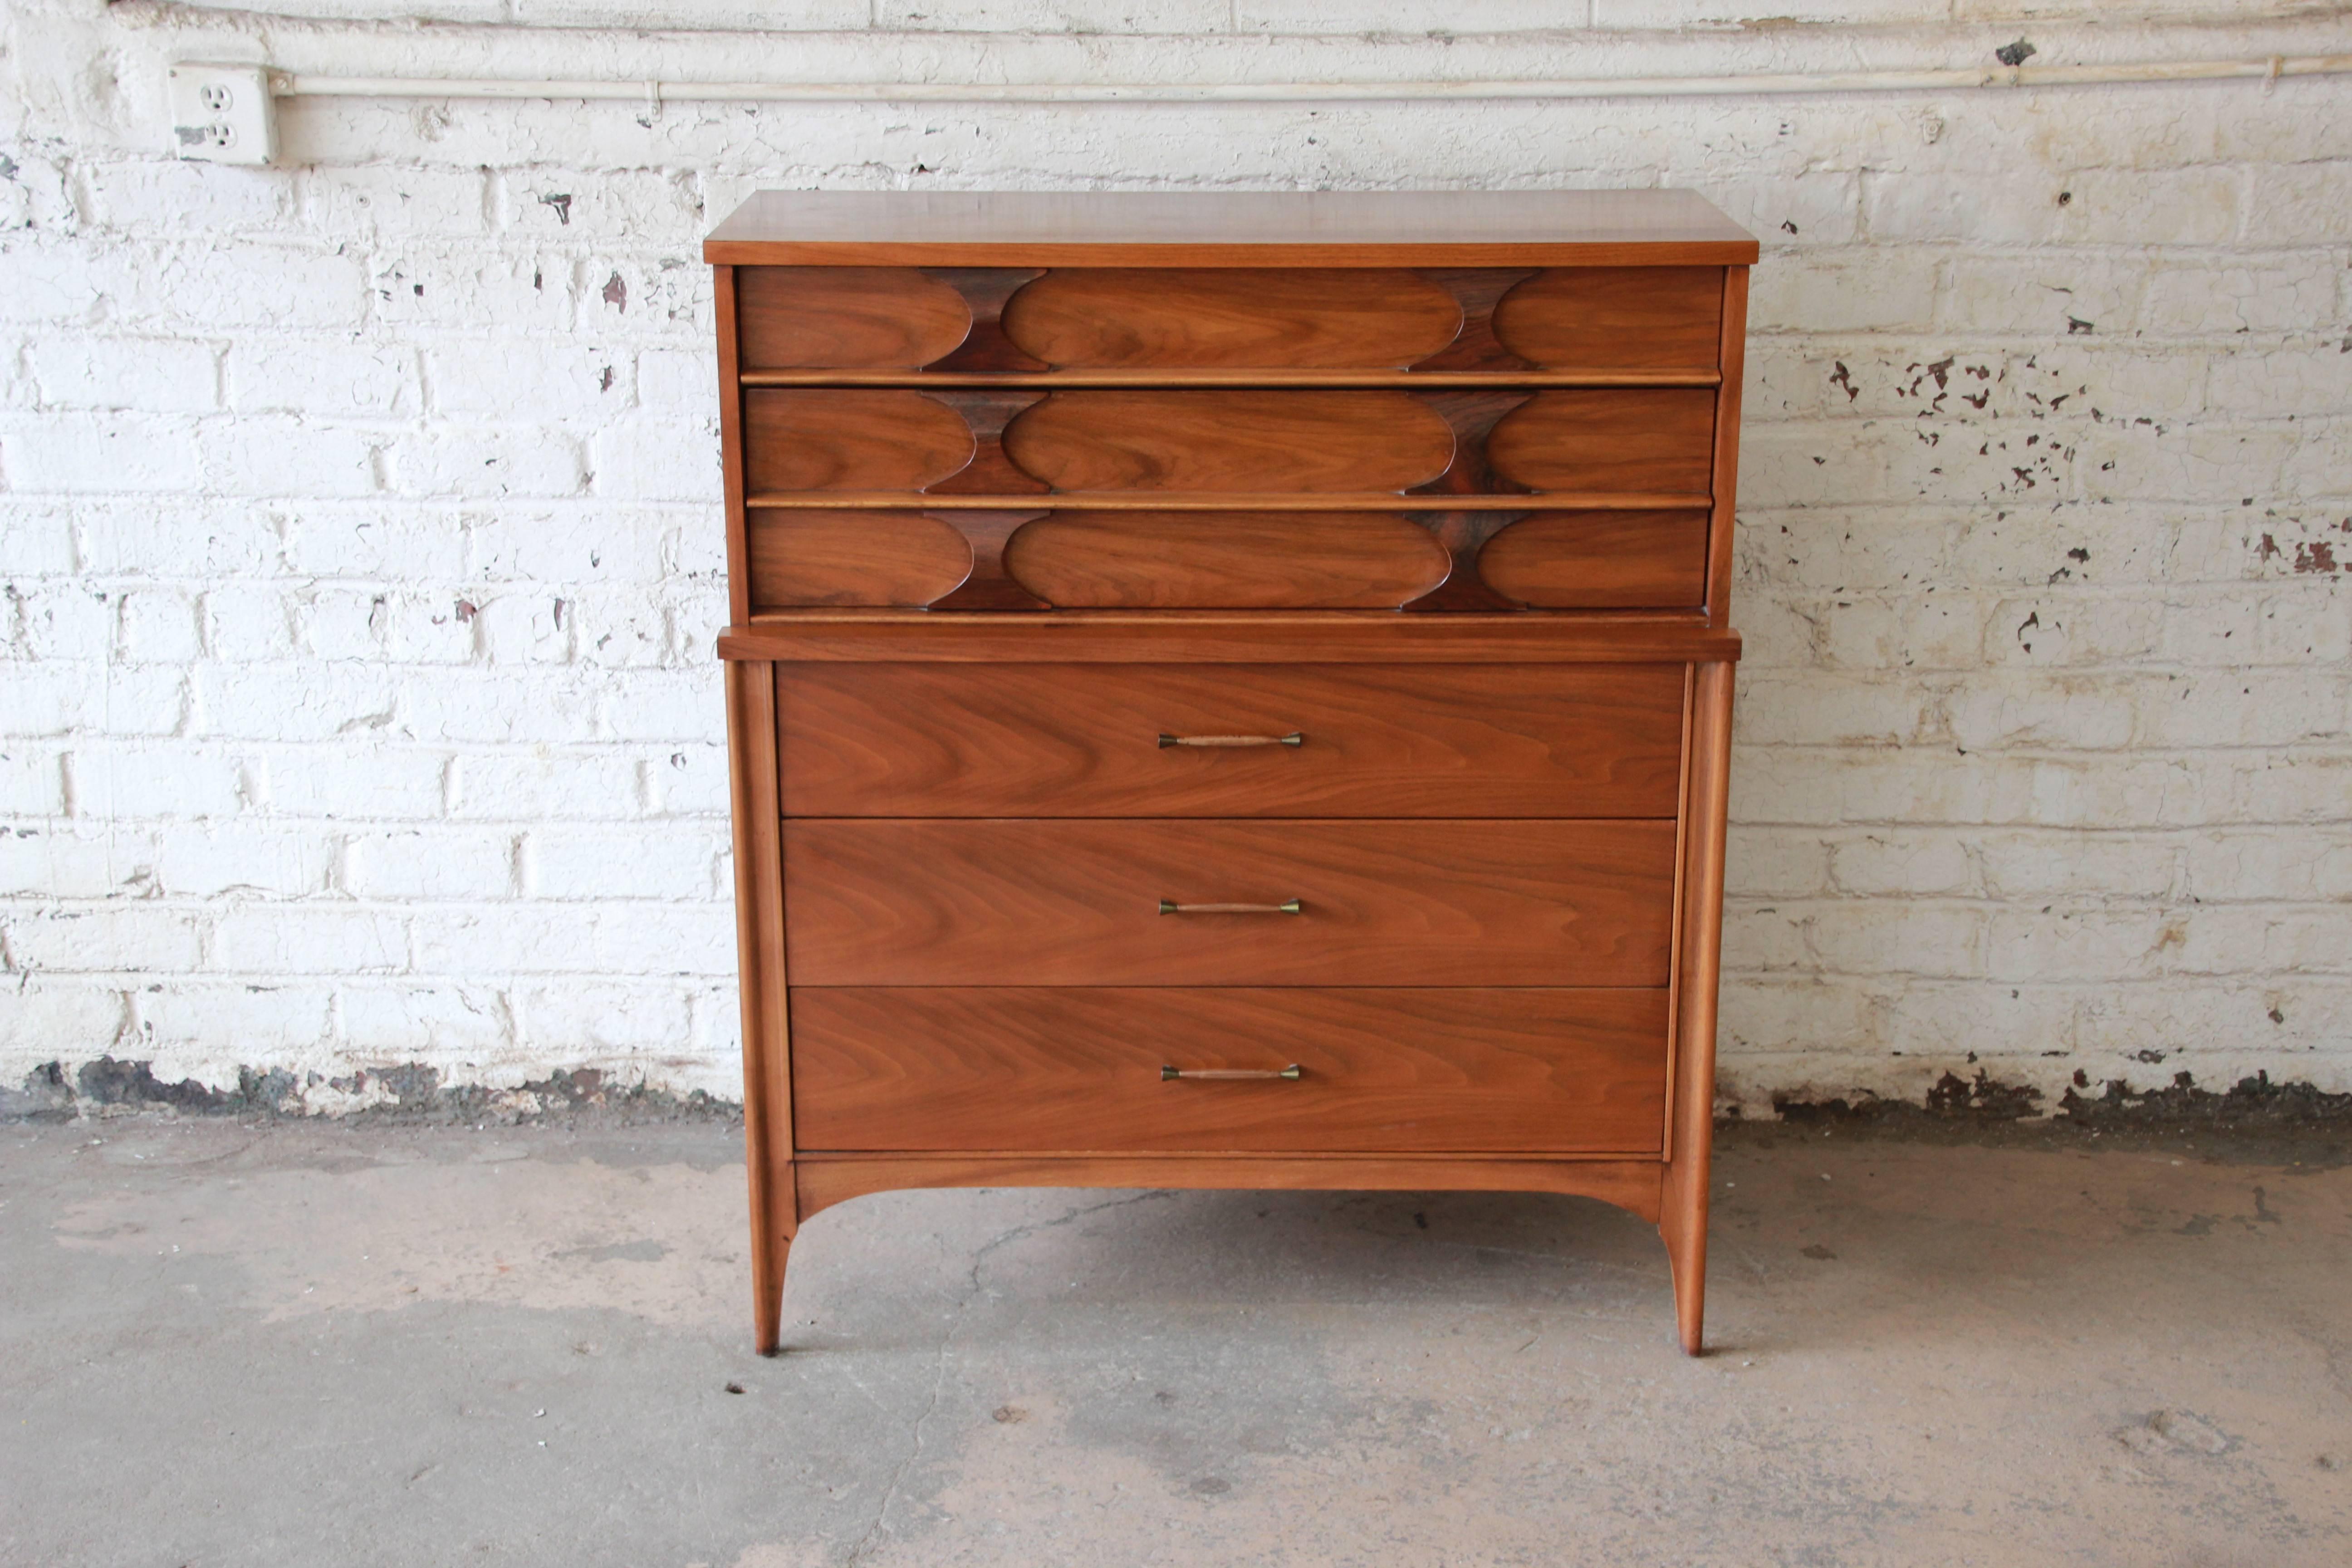 Offering a very nice Kent Coffey Perspecta Mid-Century Modern highboy dresser. The dresser has a stunning walnut wood grain and great midcentury lines. The top portion of the dresser has two drawers with rosewood pulls and a divider for